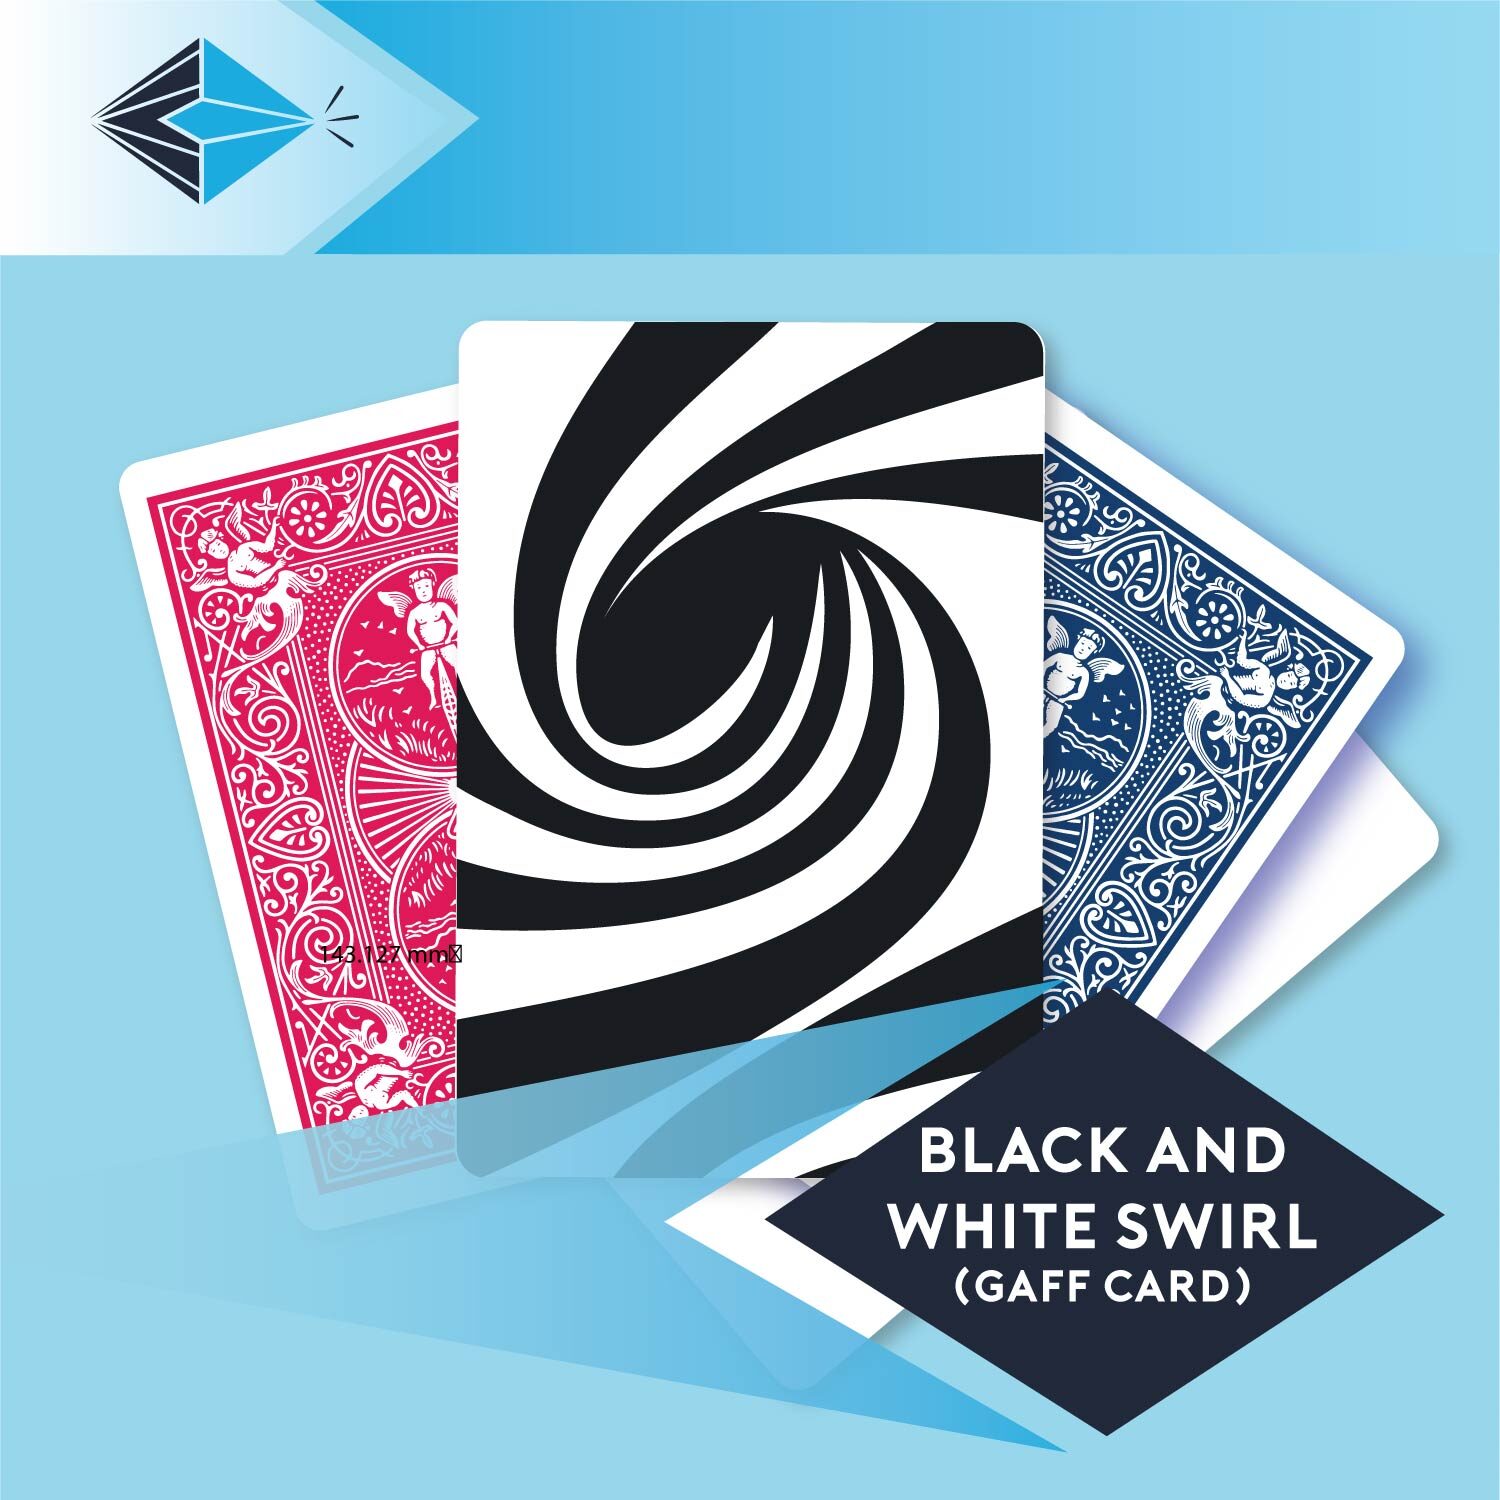 Black and White Swirl gaff card 3 printbymagic magicians gaff cards printers Stockport Manchester UK